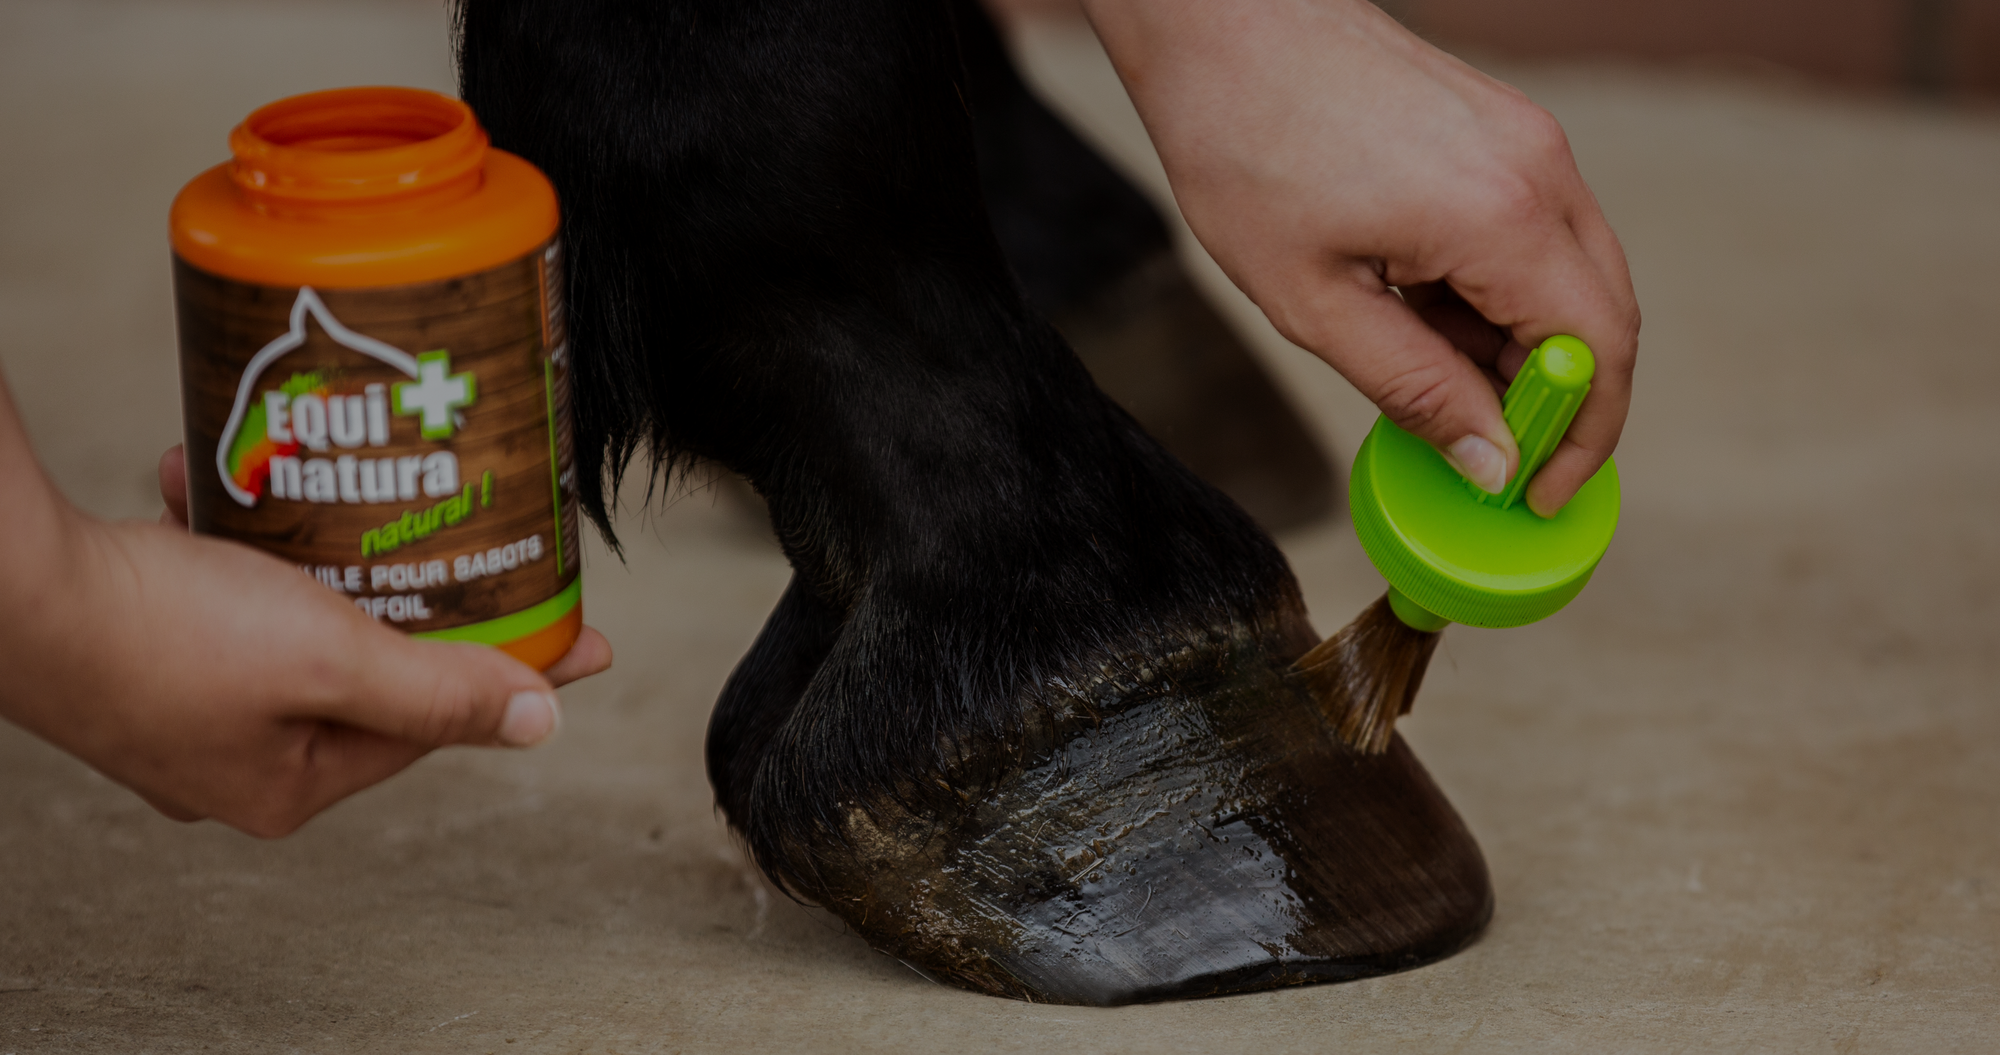 equinatura hoof oil application, natural horse care using herbs for horses